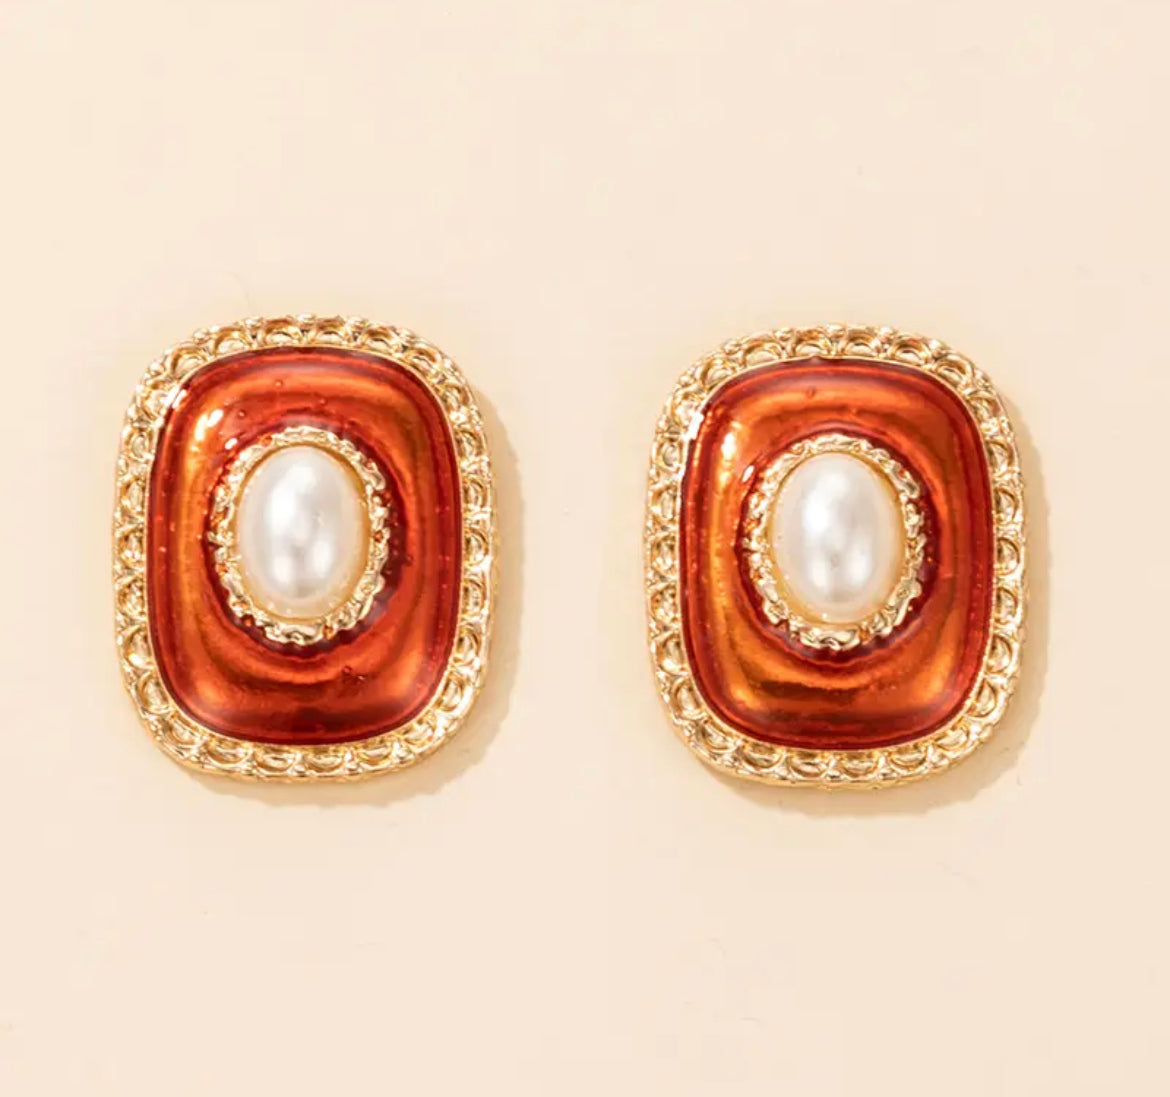 Red button earrings